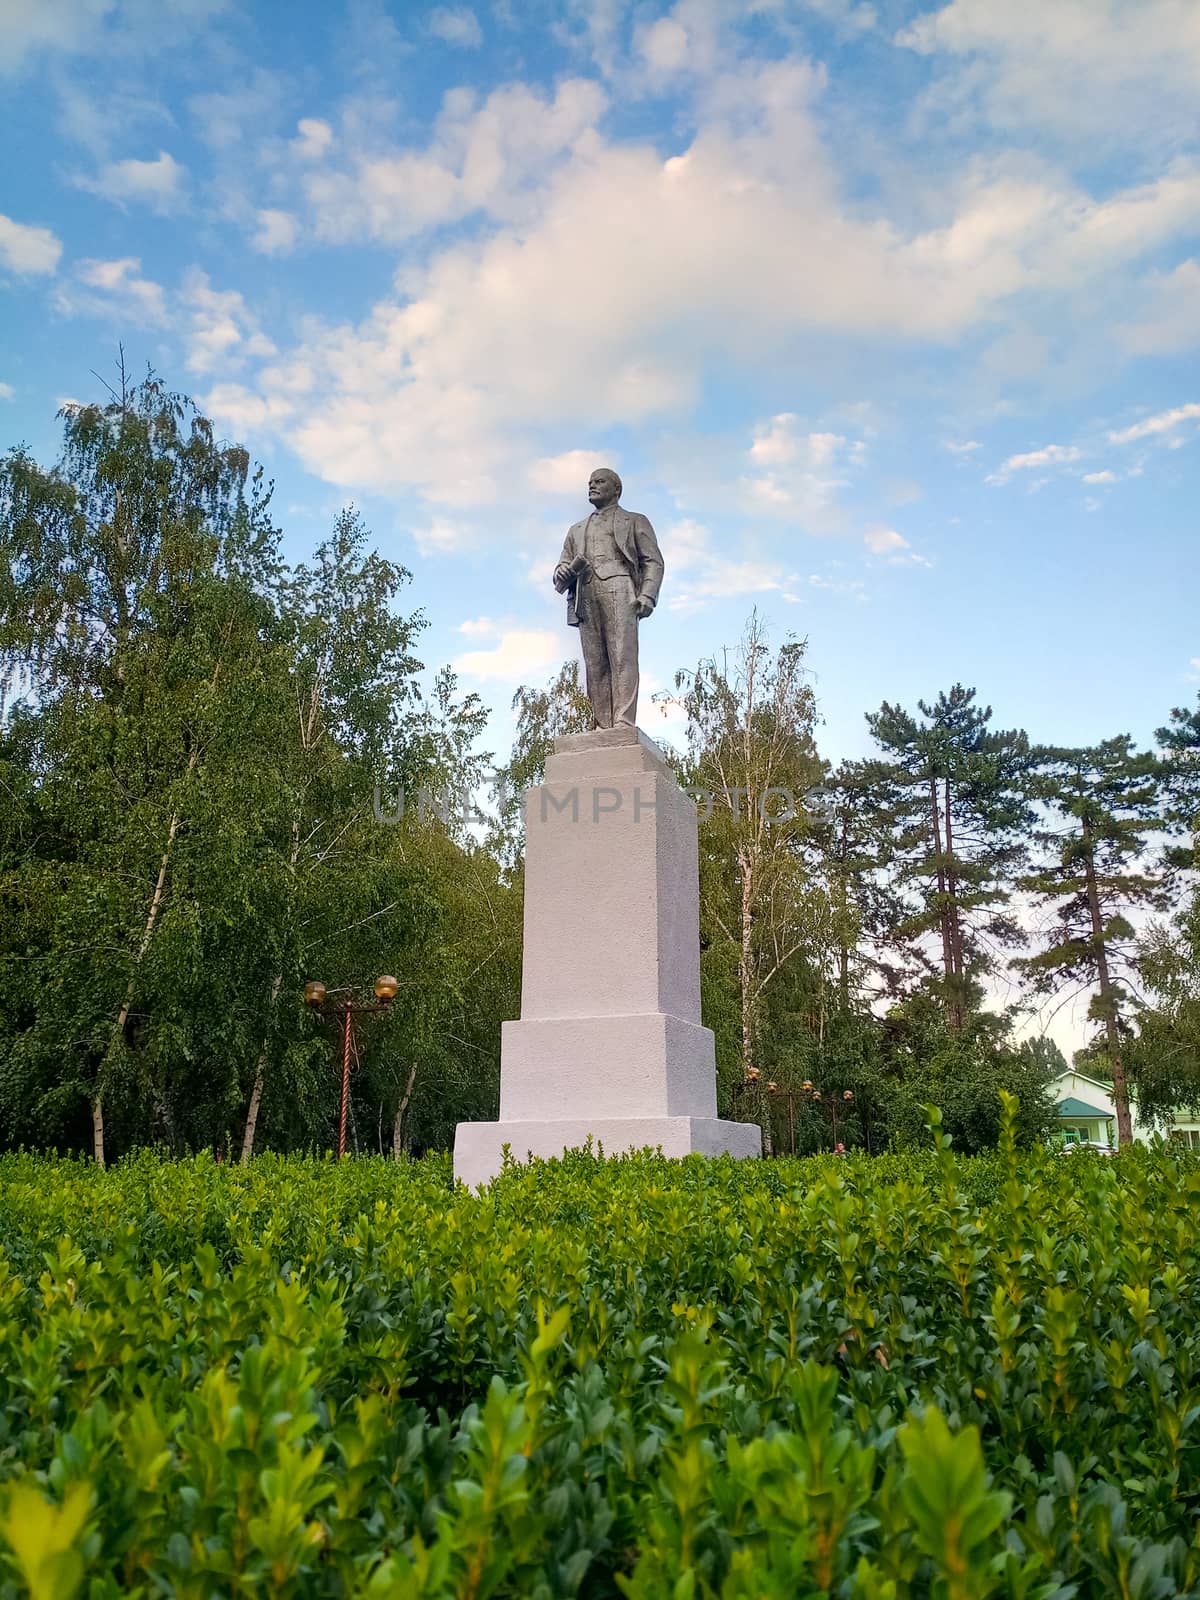 Monument to Lenin on a pedestal in the park. Leader of communism